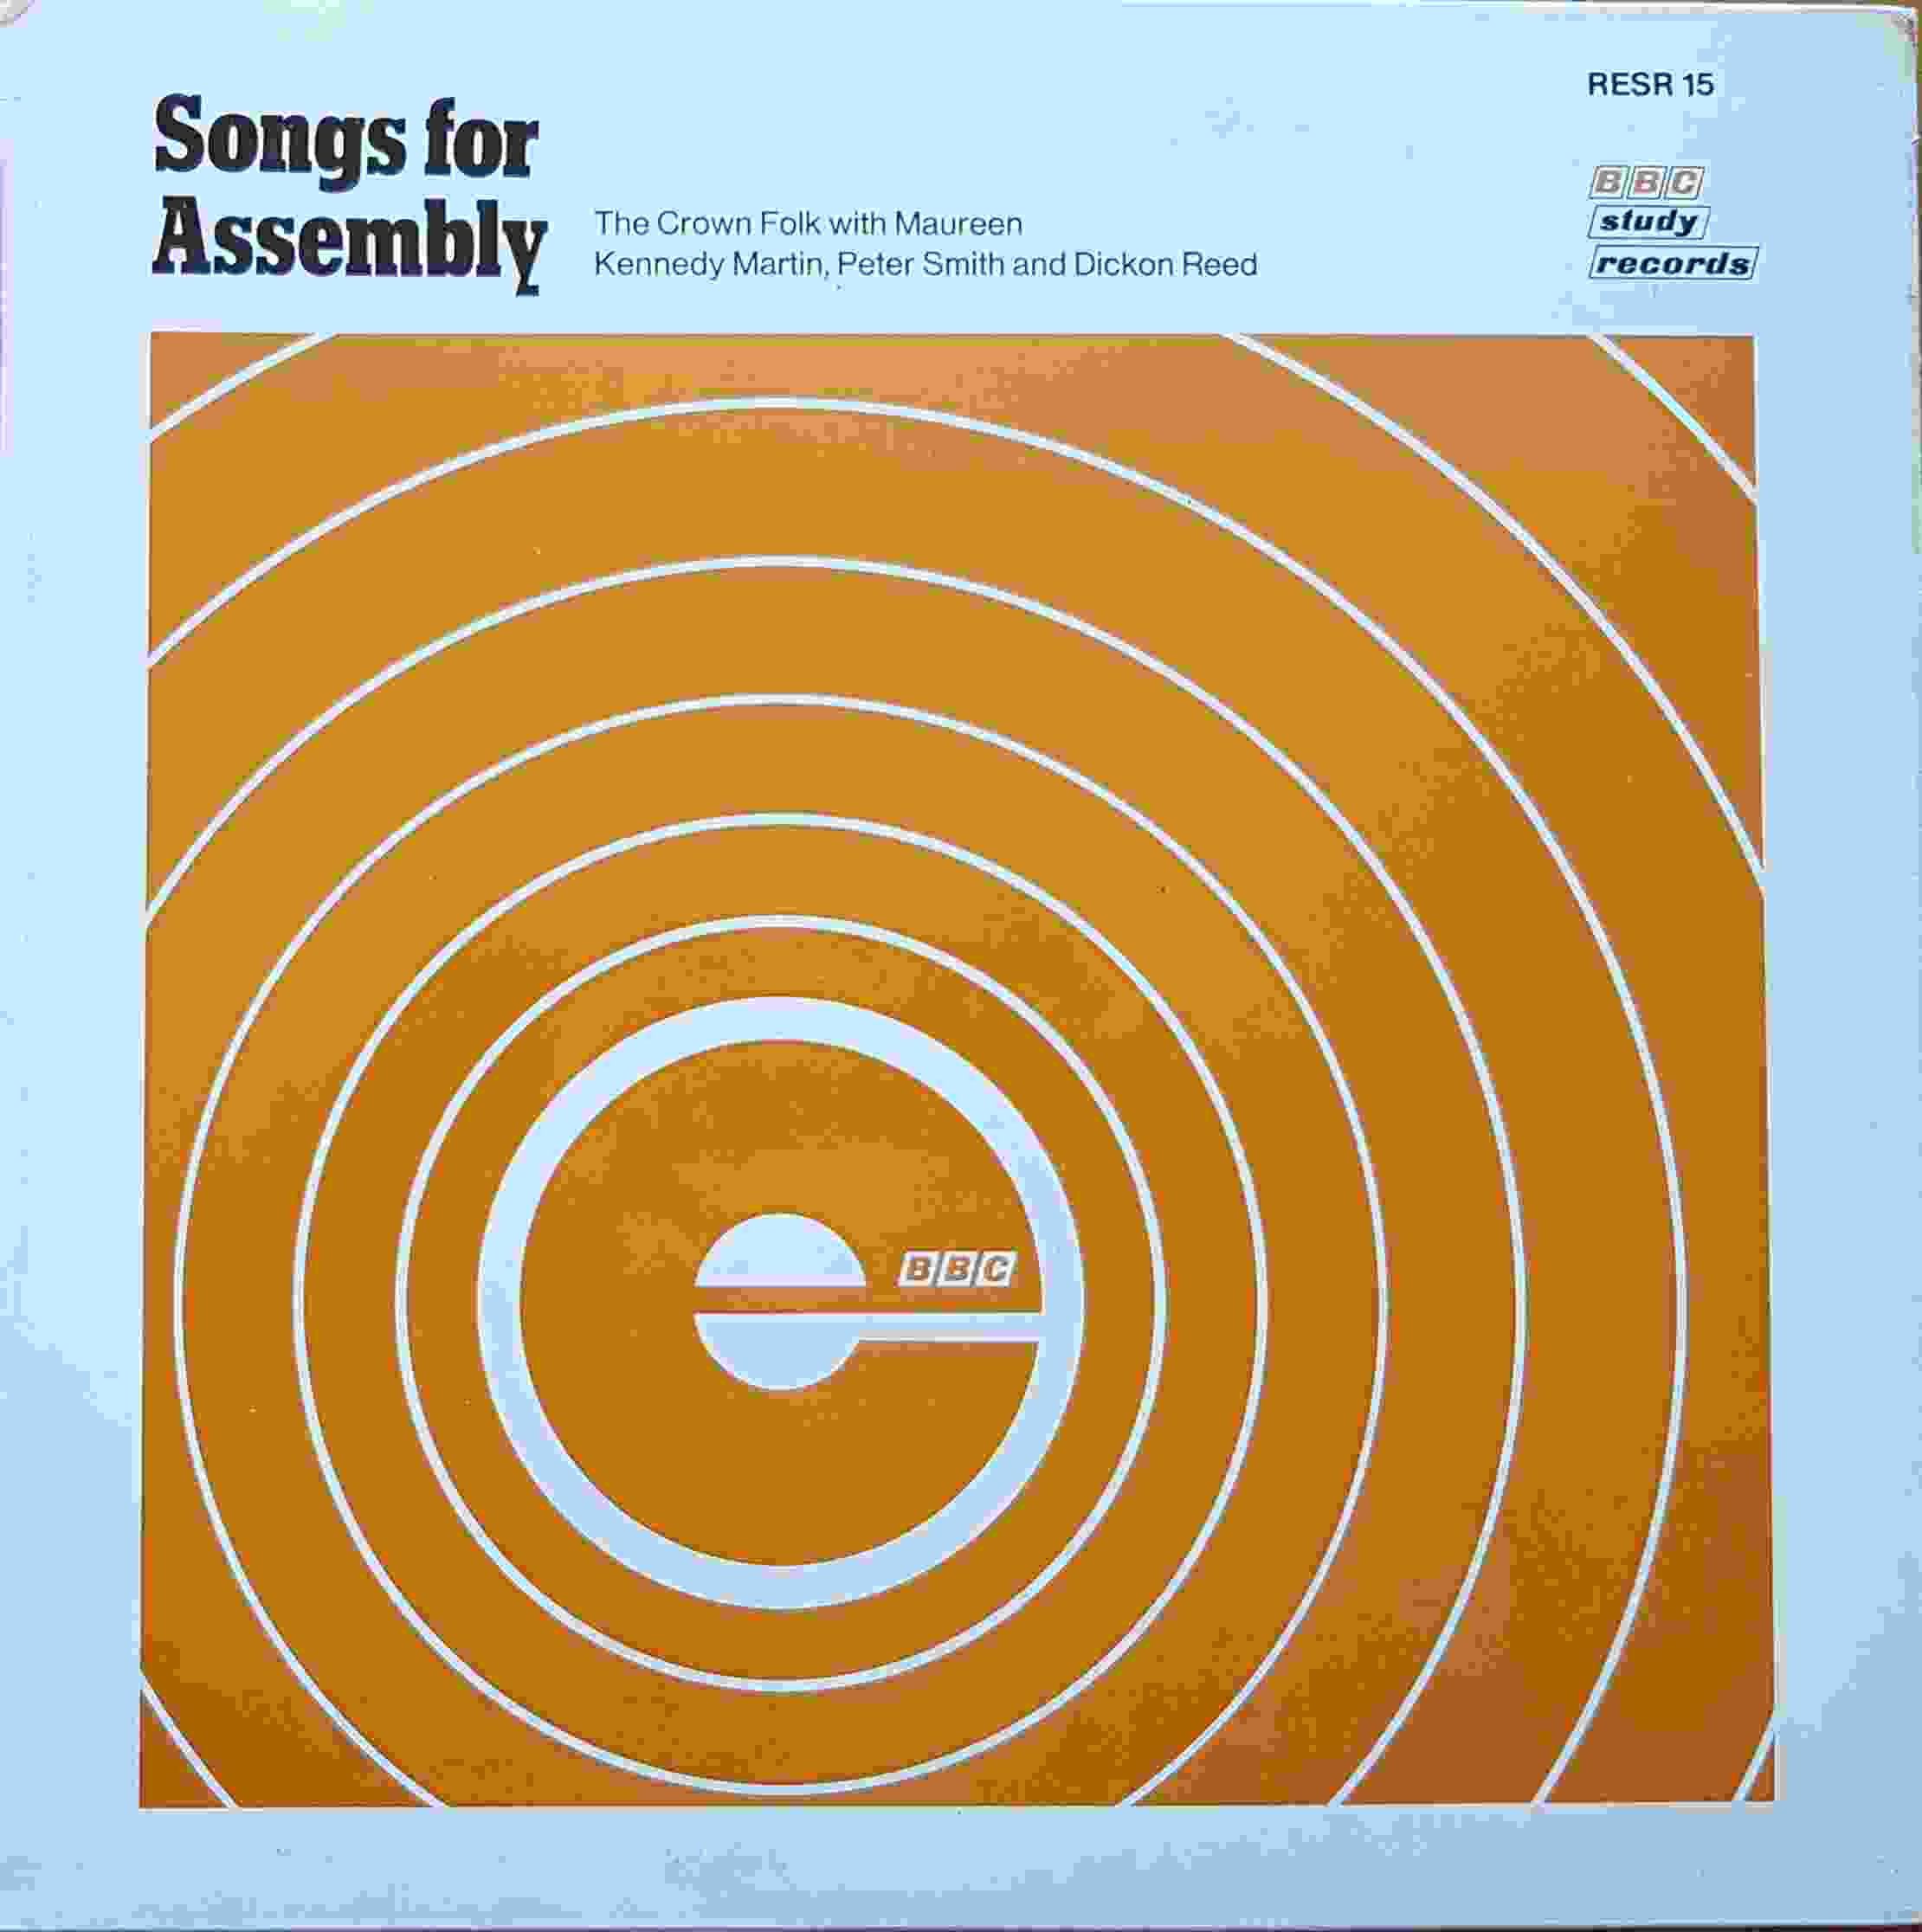 Picture of Songs for assembly by artist The Crown Folk / Maureen Kennedy Martin / Peter Smith / Dickon Reed from the BBC albums - Records and Tapes library